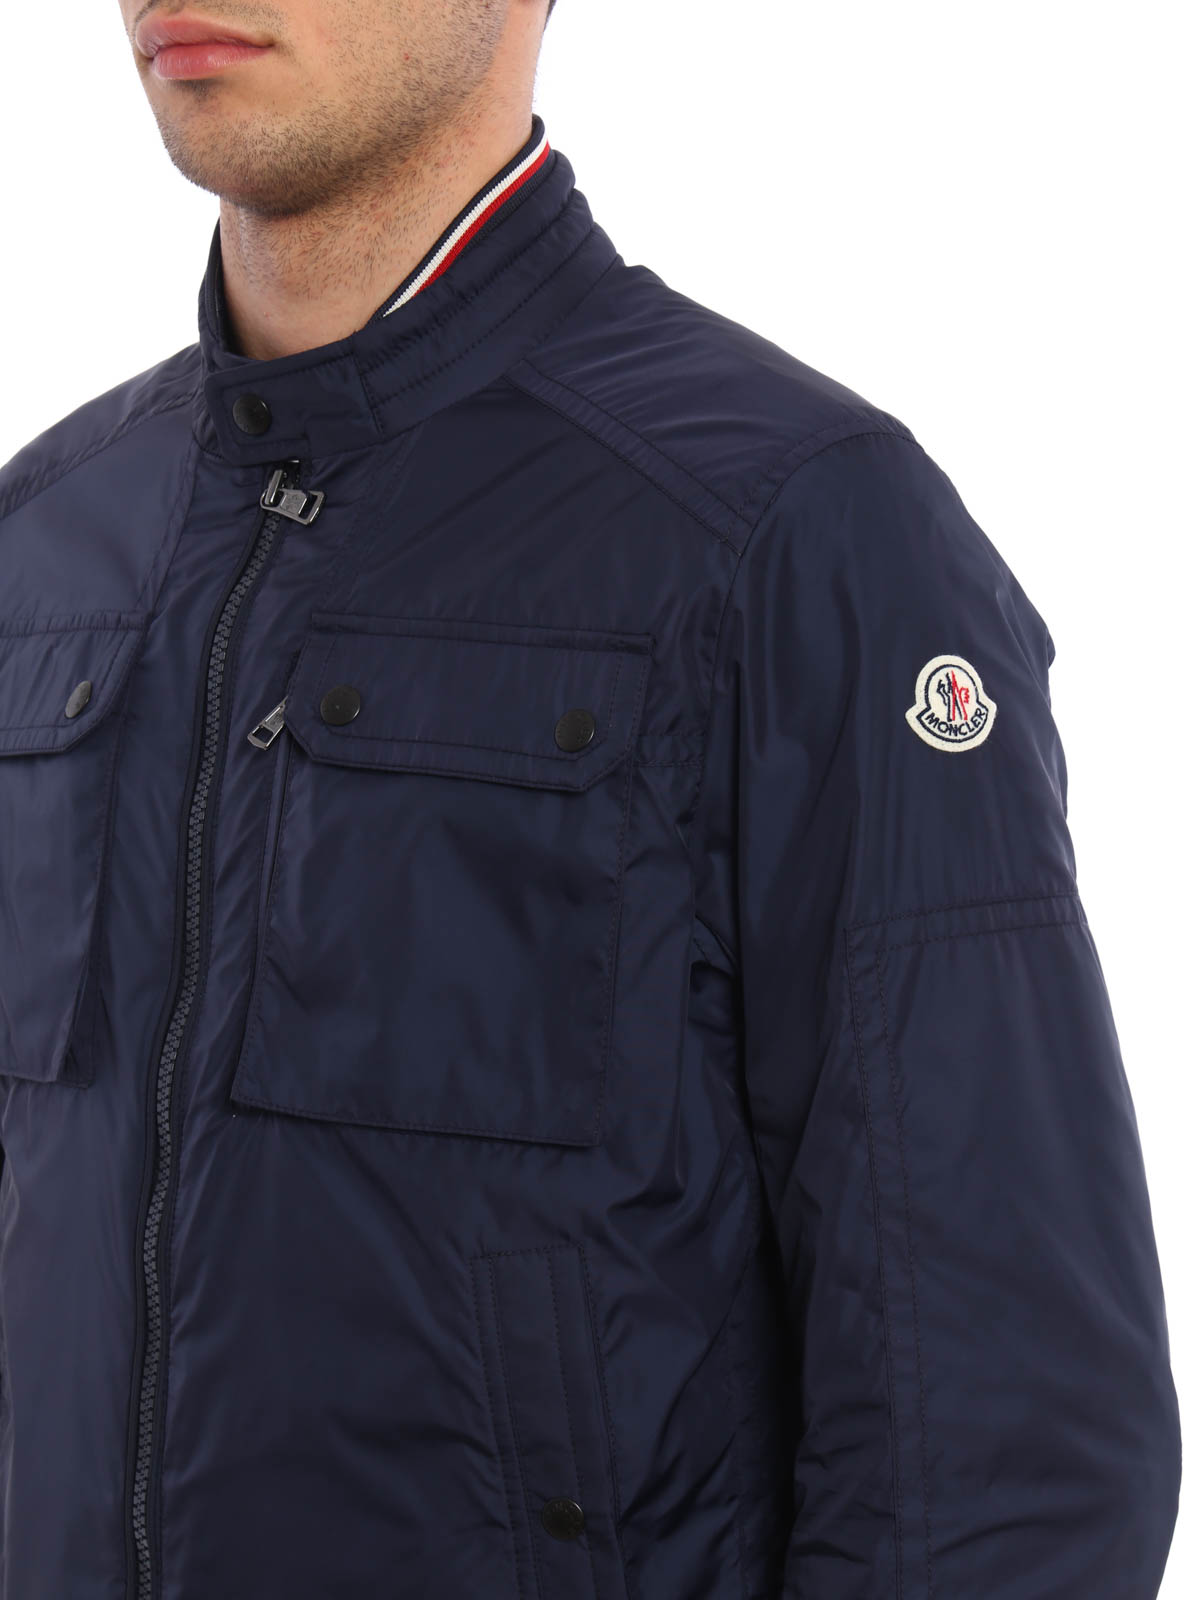 MONCLER /LEVENS GIUBBOTTO/ブルゾン/ 3/